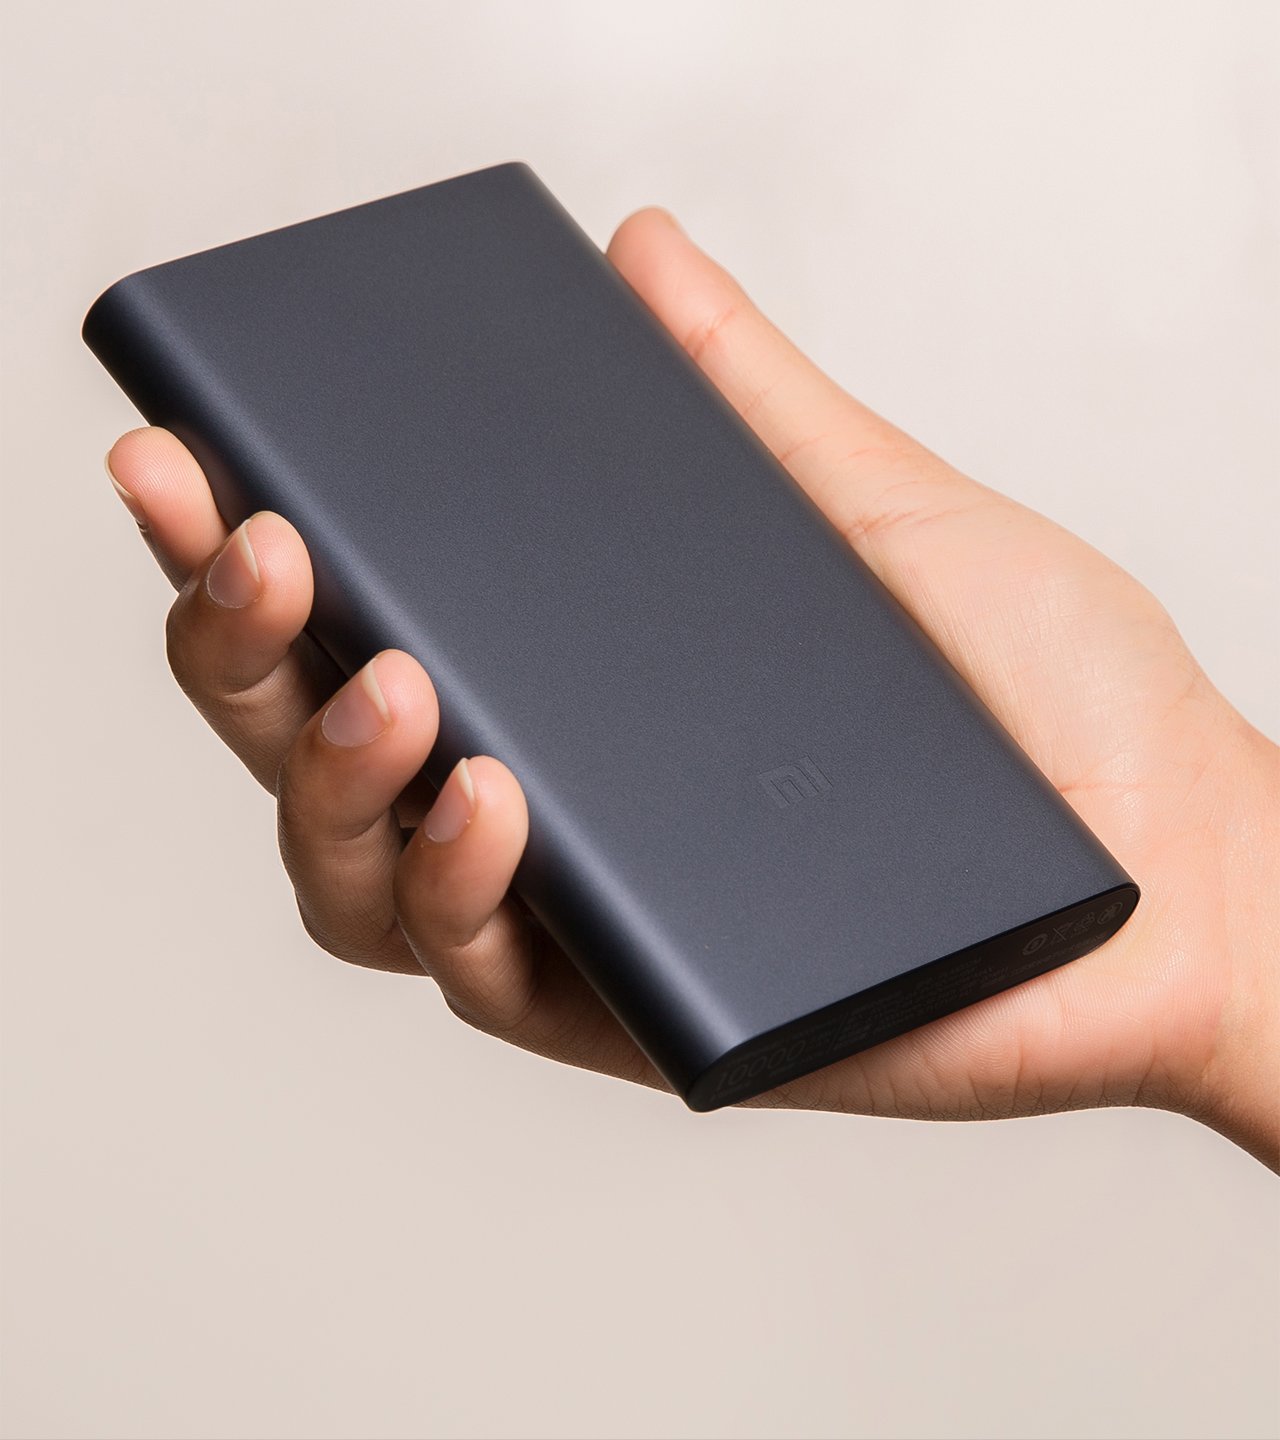 Xiaomi Mi Power Bank 2, Mi Repeater 2 And More Launched in ...